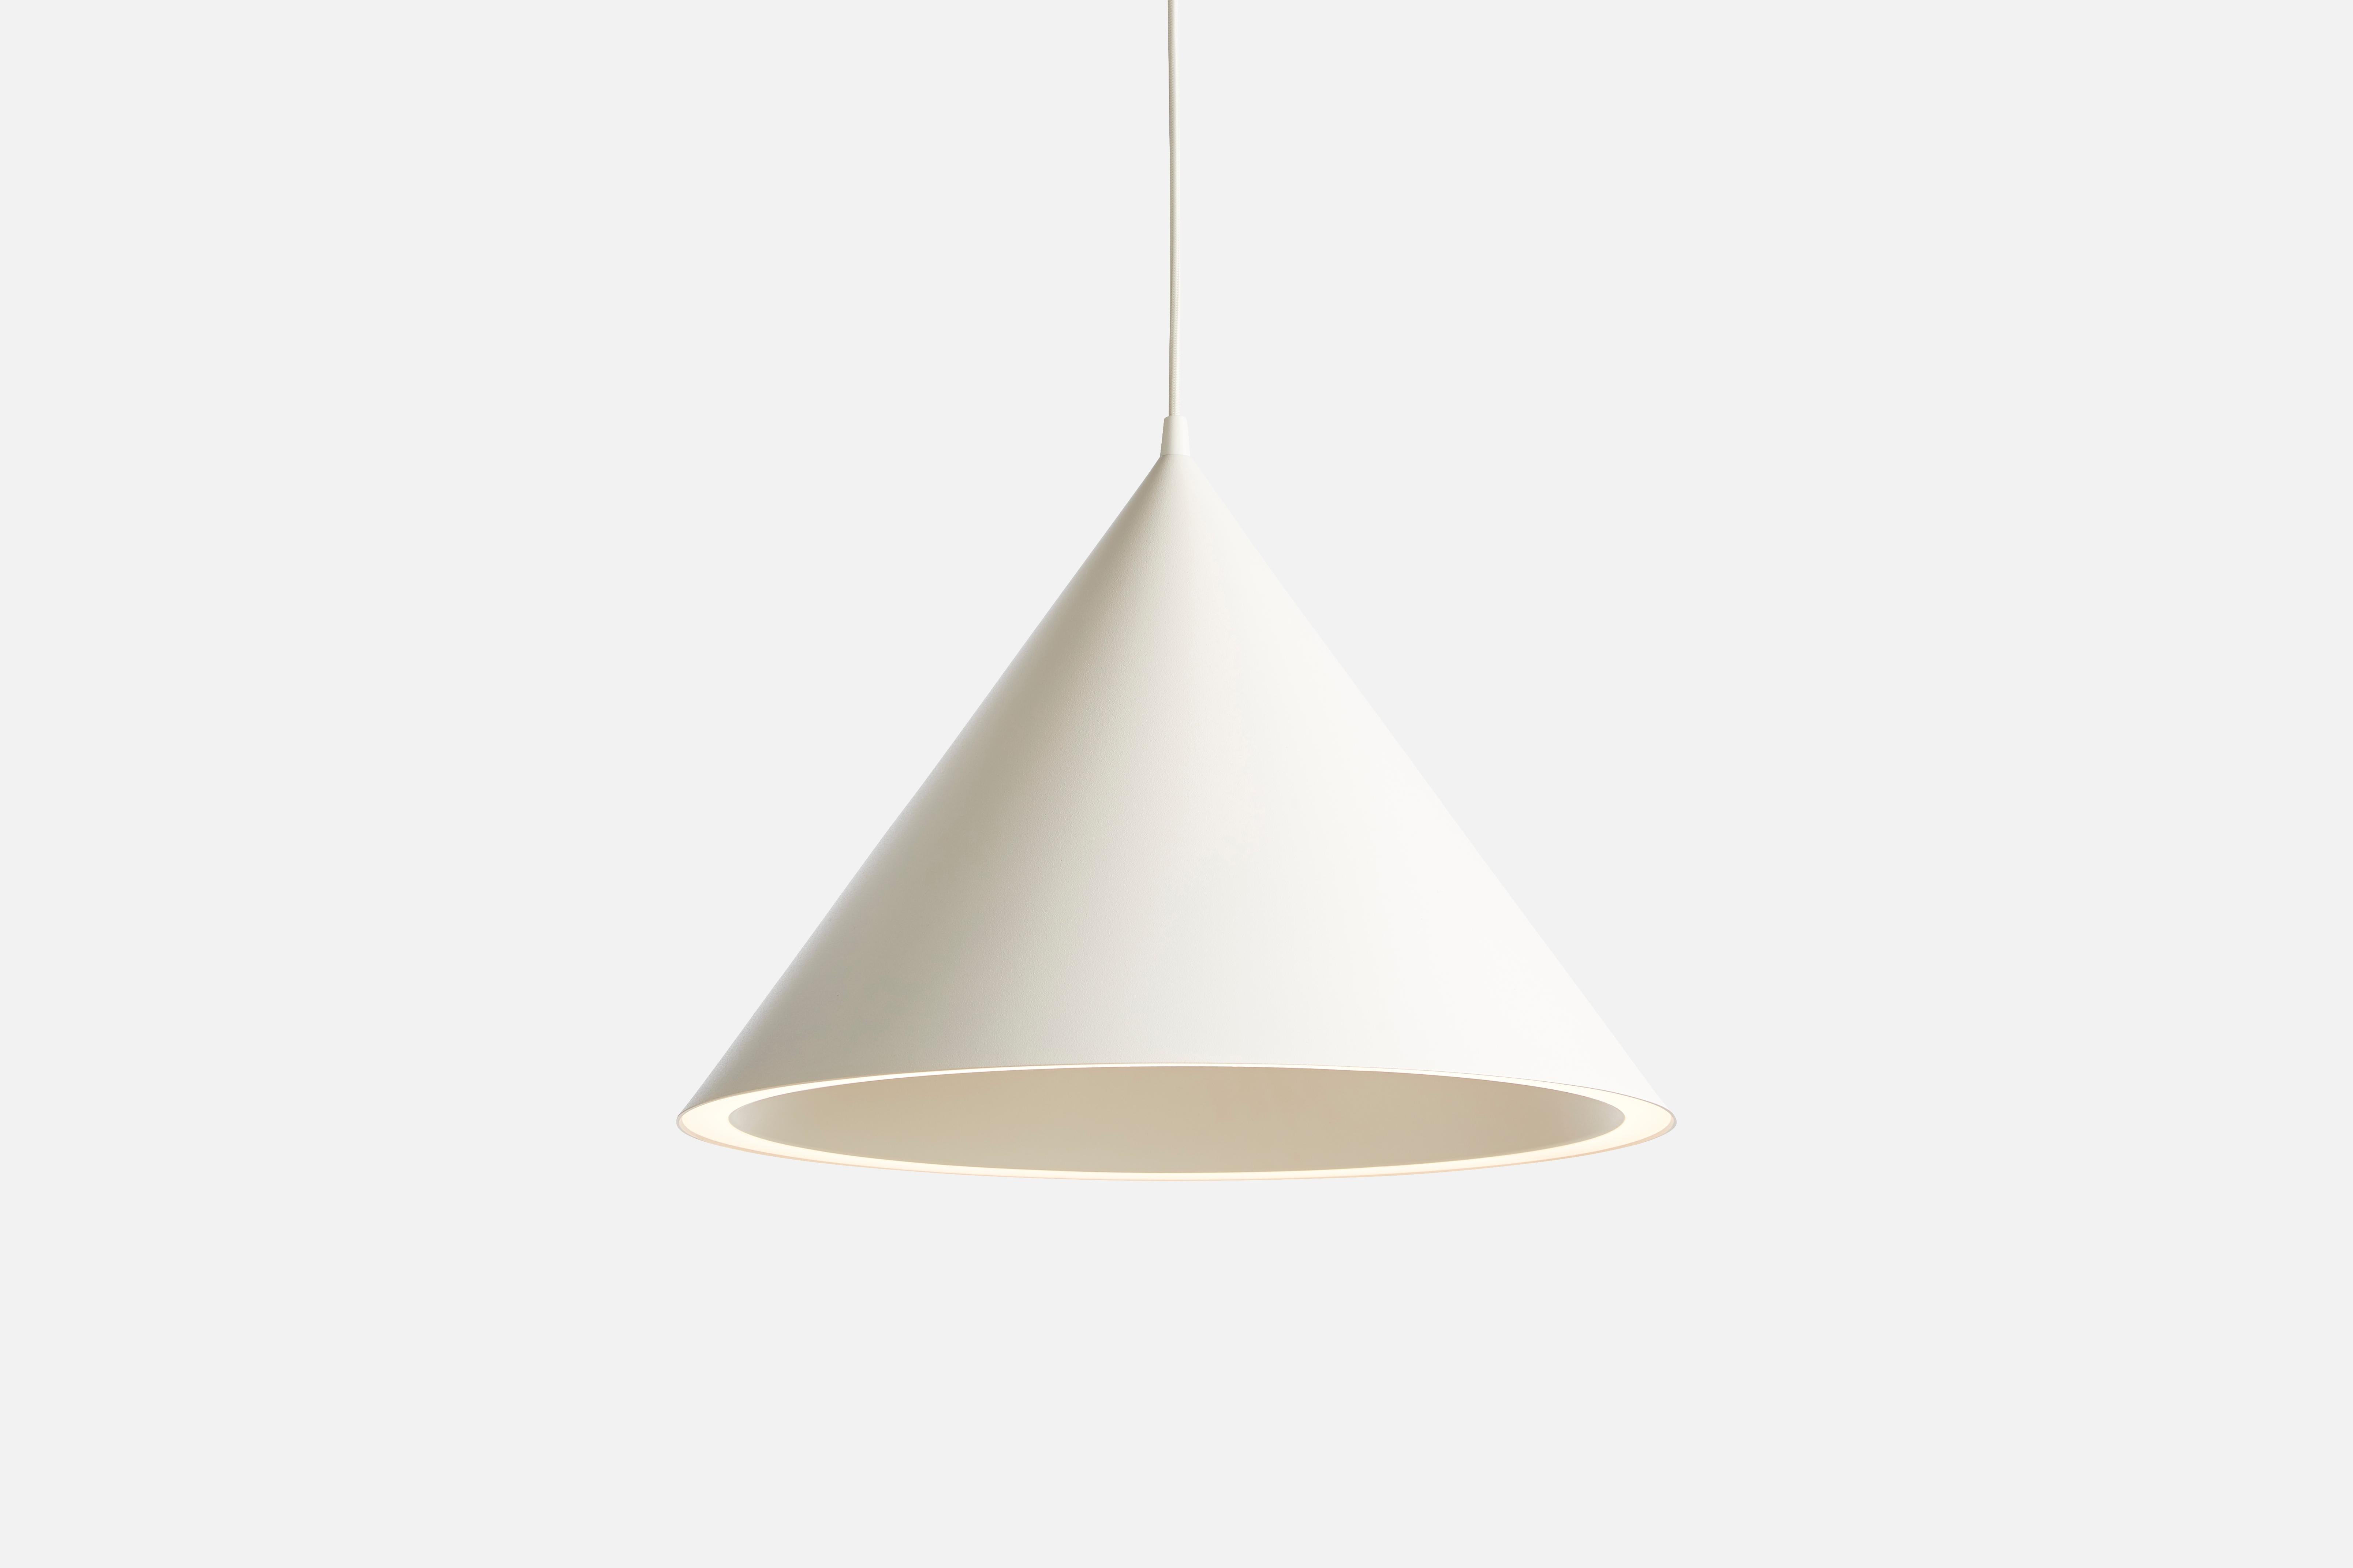 Large white Annular pendant lamp by MSDS Studio
Materials: aluminum.
Dimensions: D 46.8 x H 32.4 cm
Available in white or black.
Available in 2 sizes: D32, D46.8 cm.

MSDS STUDIO is a successful Canadian design studio that works in interior,